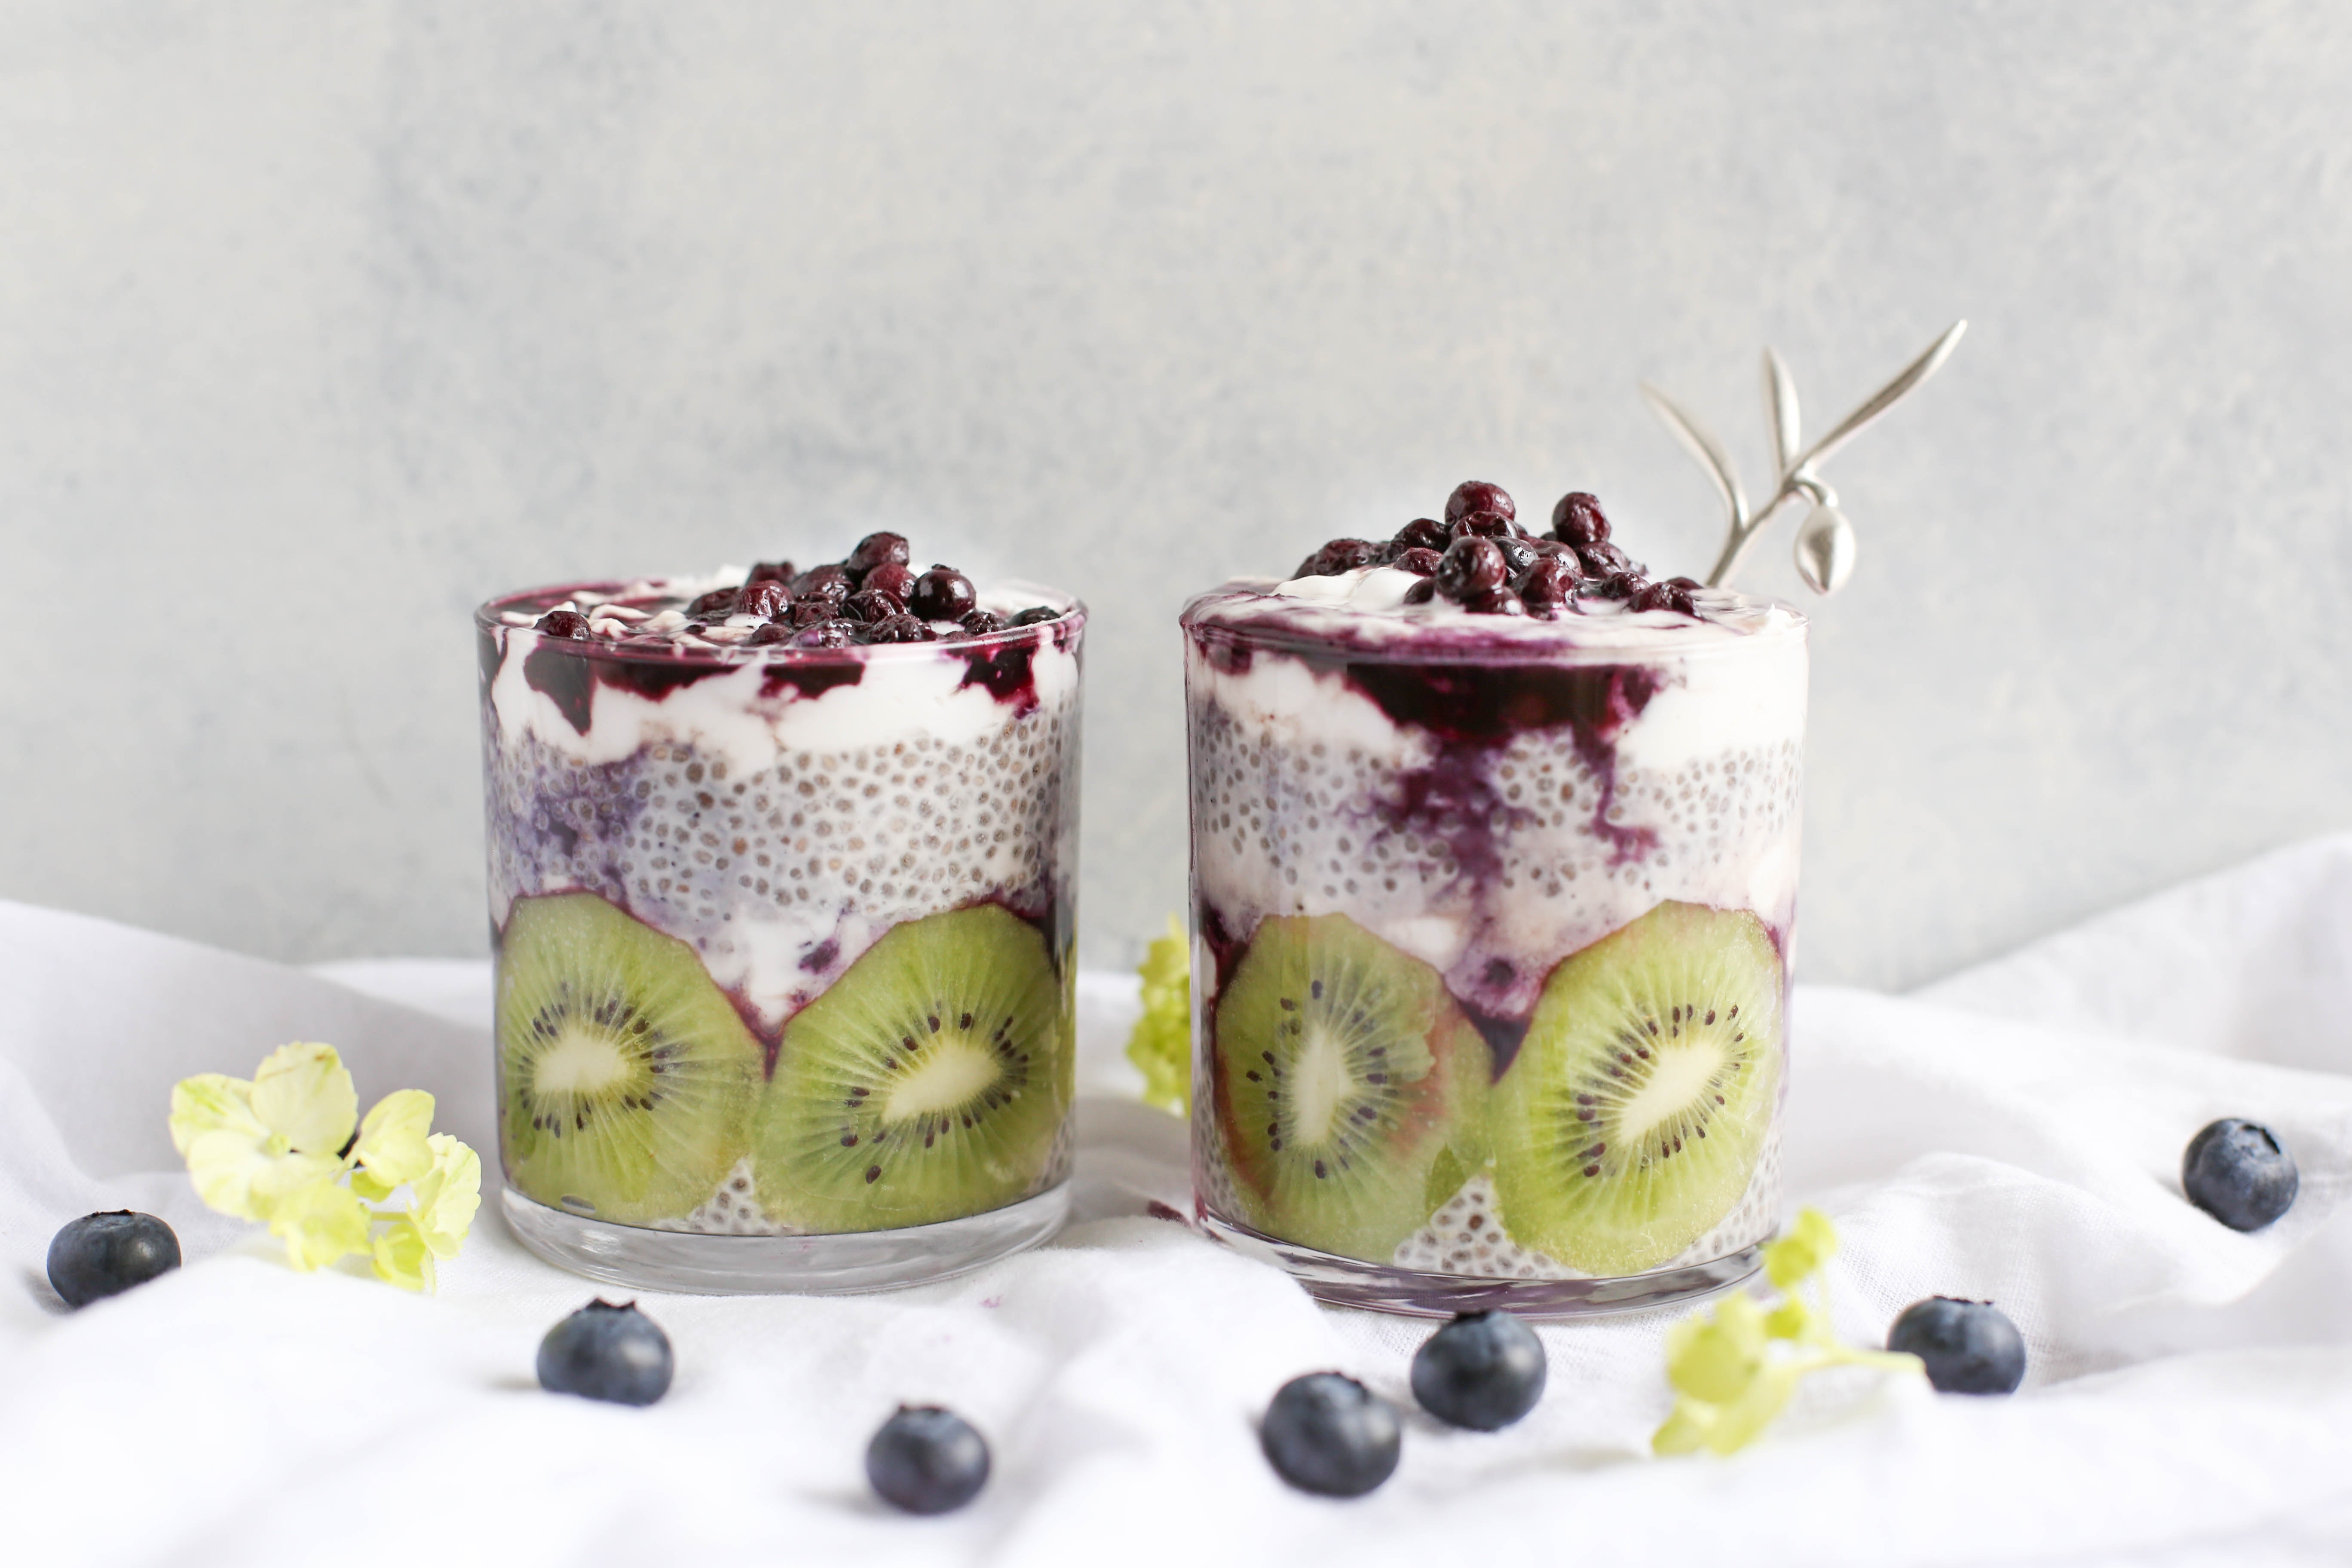 chia seeds and blueberries. https://www.info-on-high-blood-pressure.com/lowdown-on-cholesterol.html